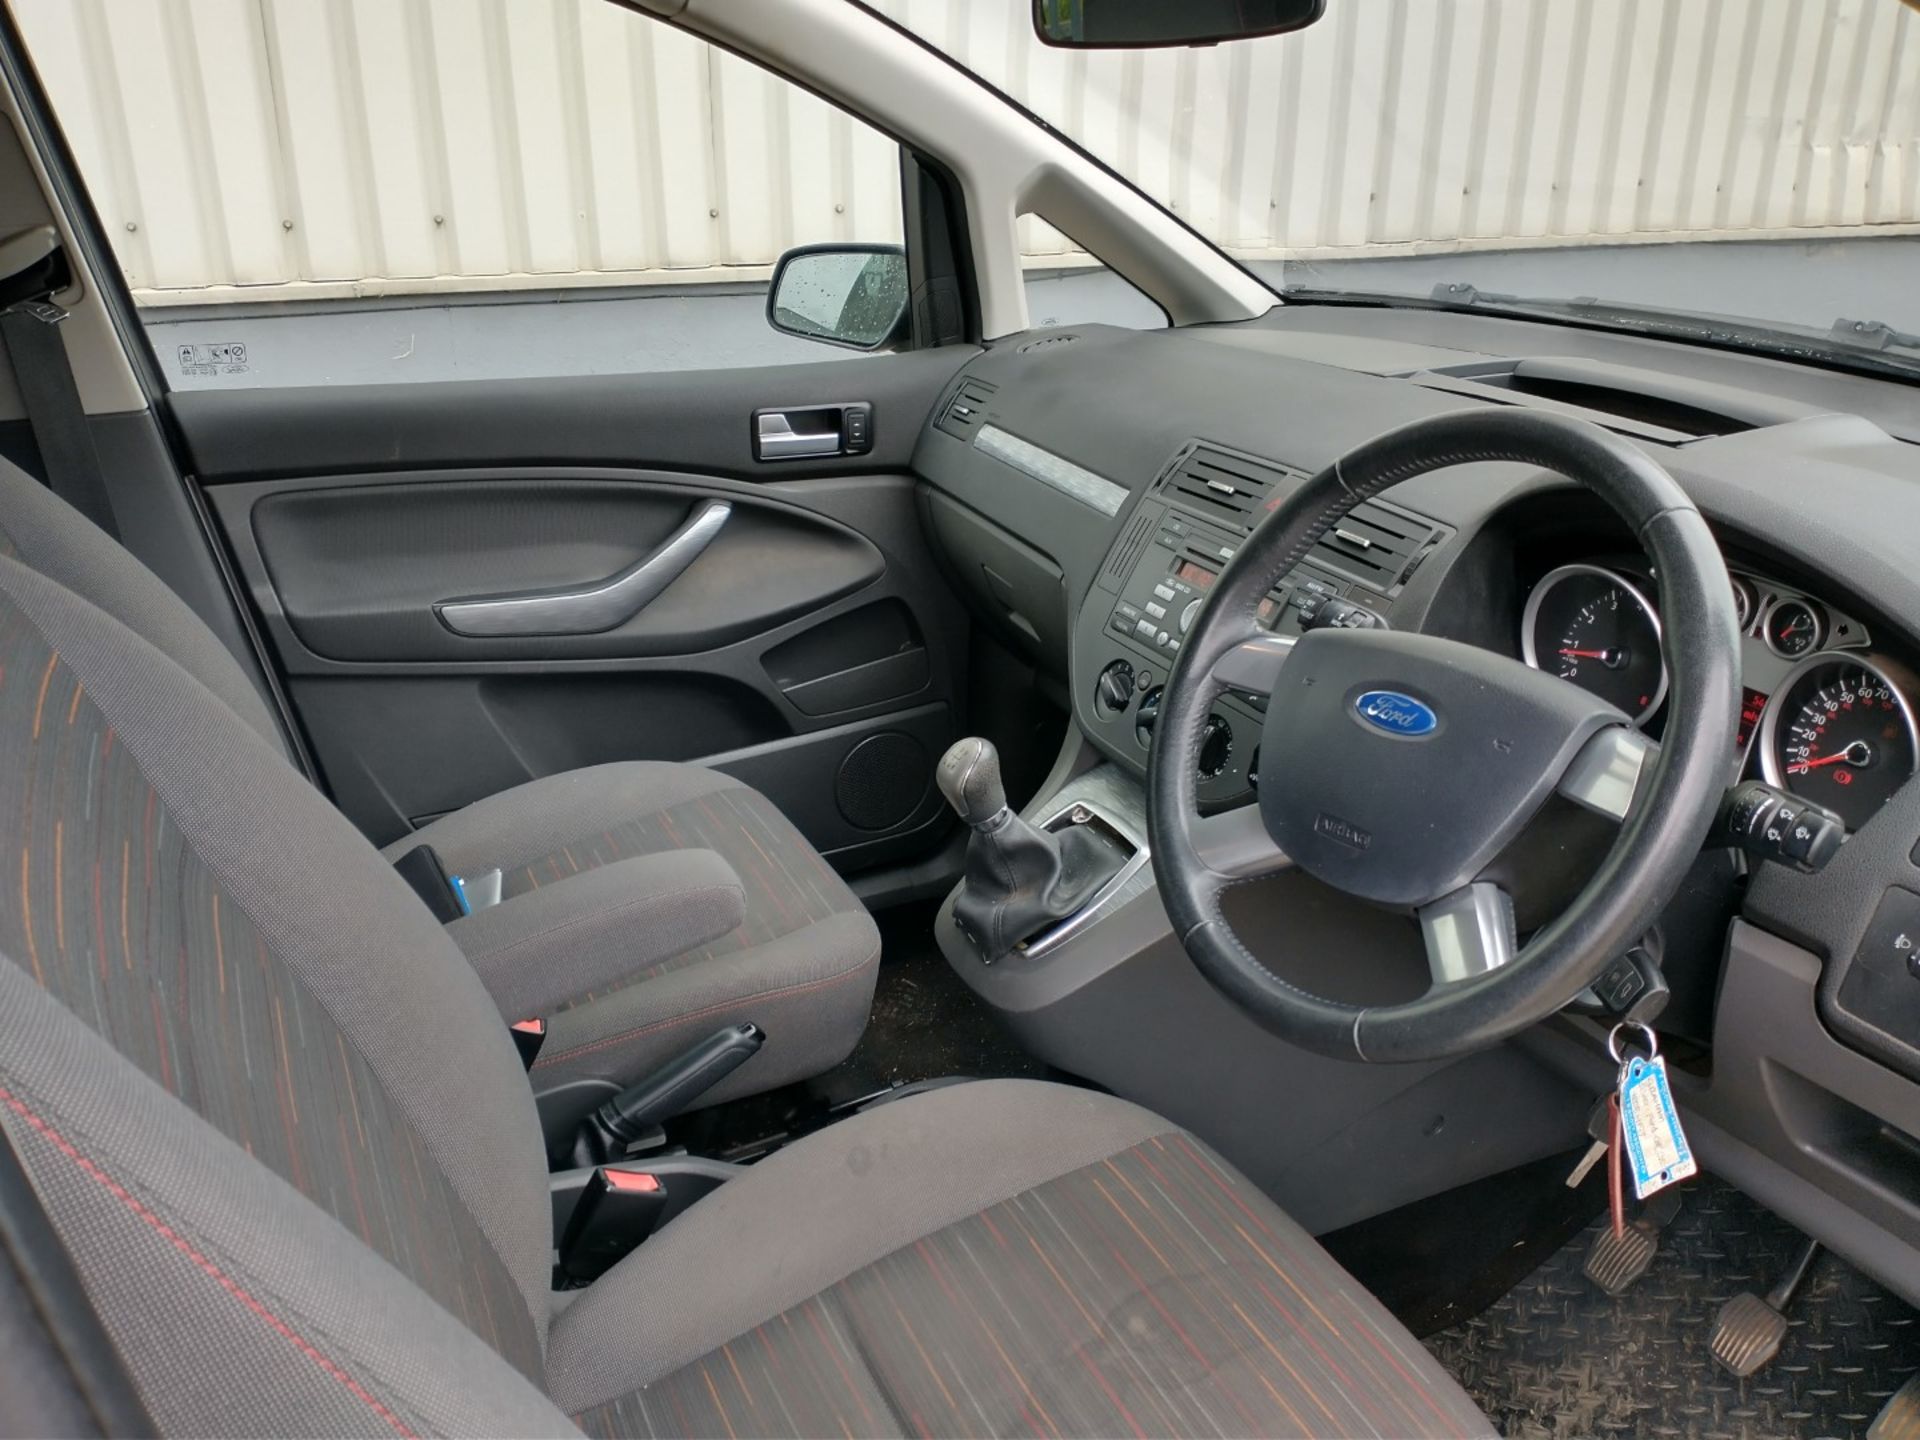 2008 Ford C-Max Zetec MPV 5dr 1.8 Petrol - CL505 - NO VAT ON THE HAMMER - Location: Corby - Image 17 of 17